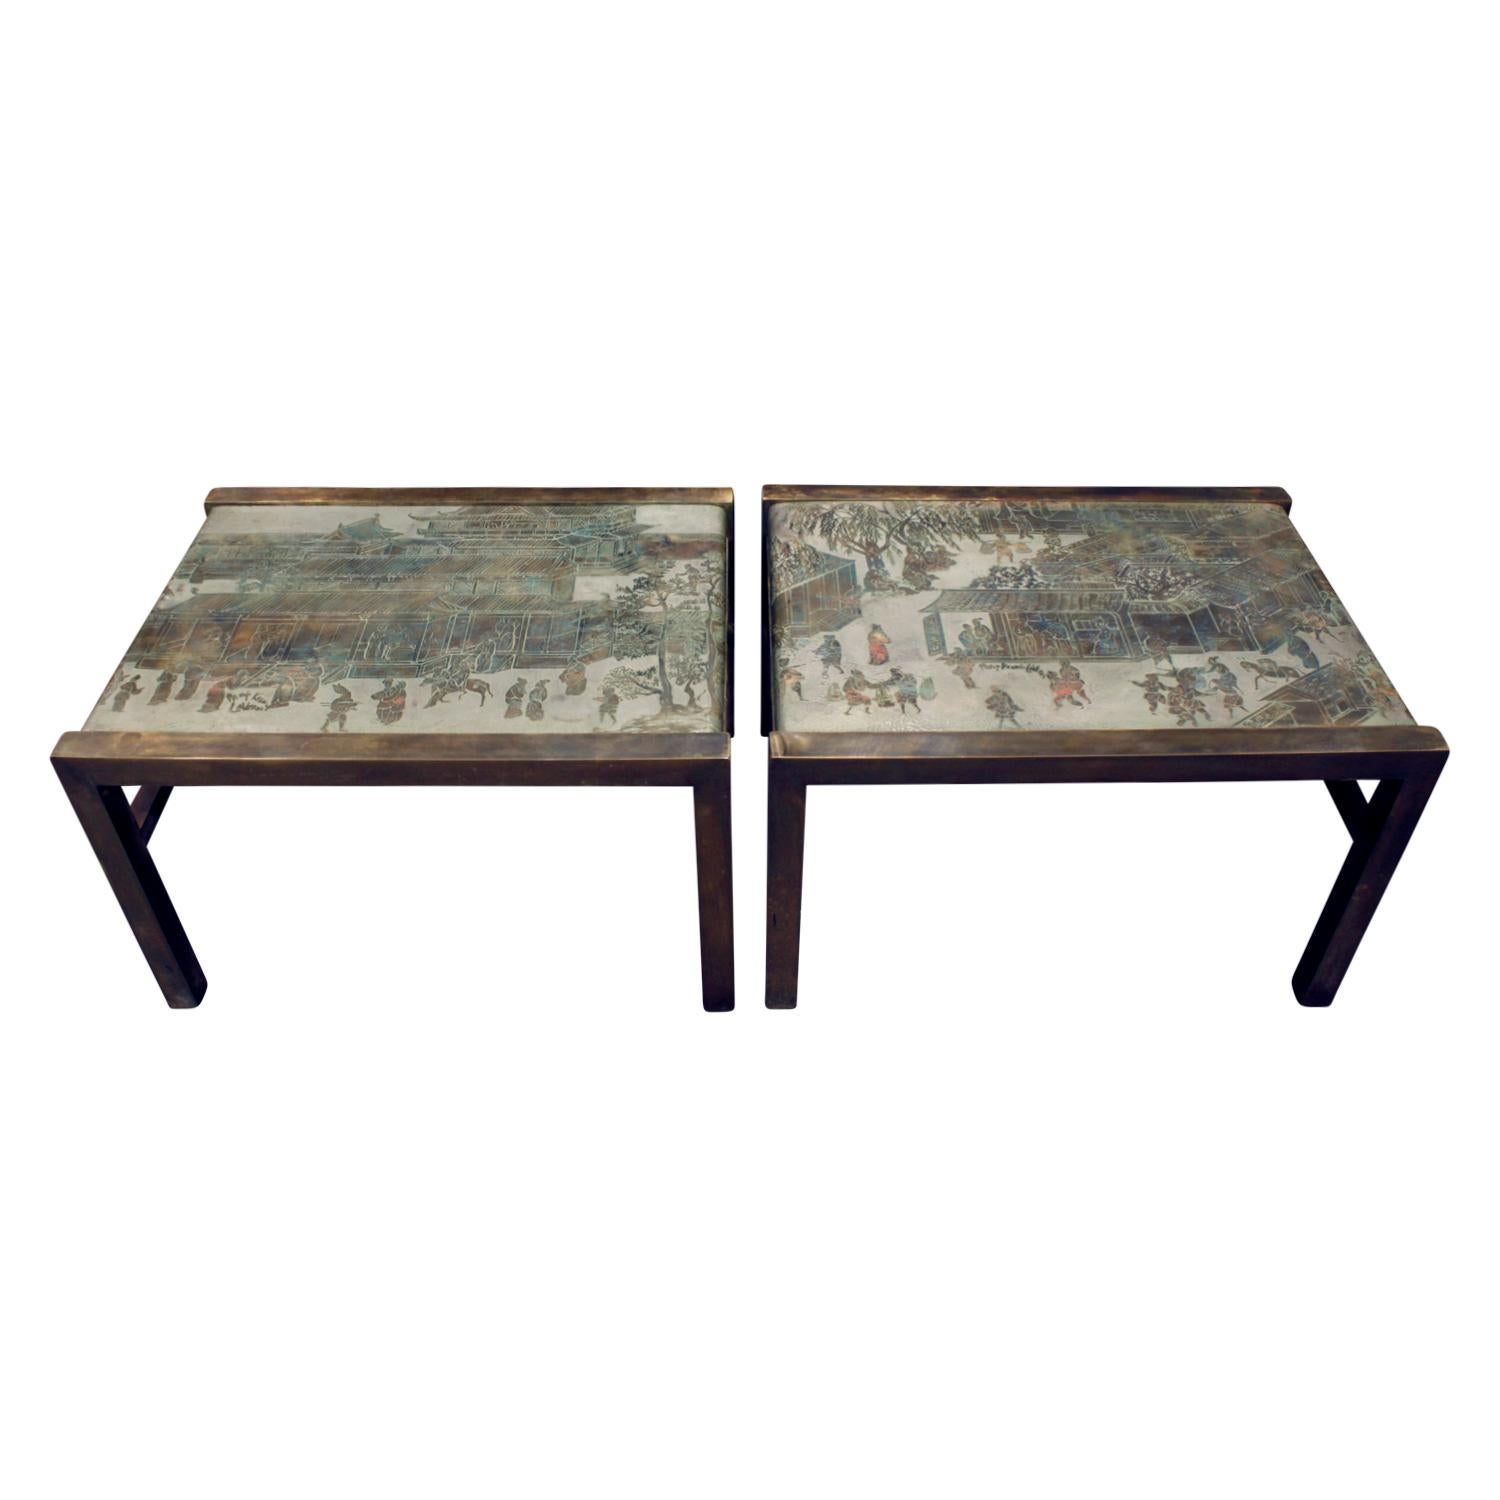 Philip & Kelvin LaVerne Rare Pair of "Festival" Coffee Tables 1960s 'Signed'